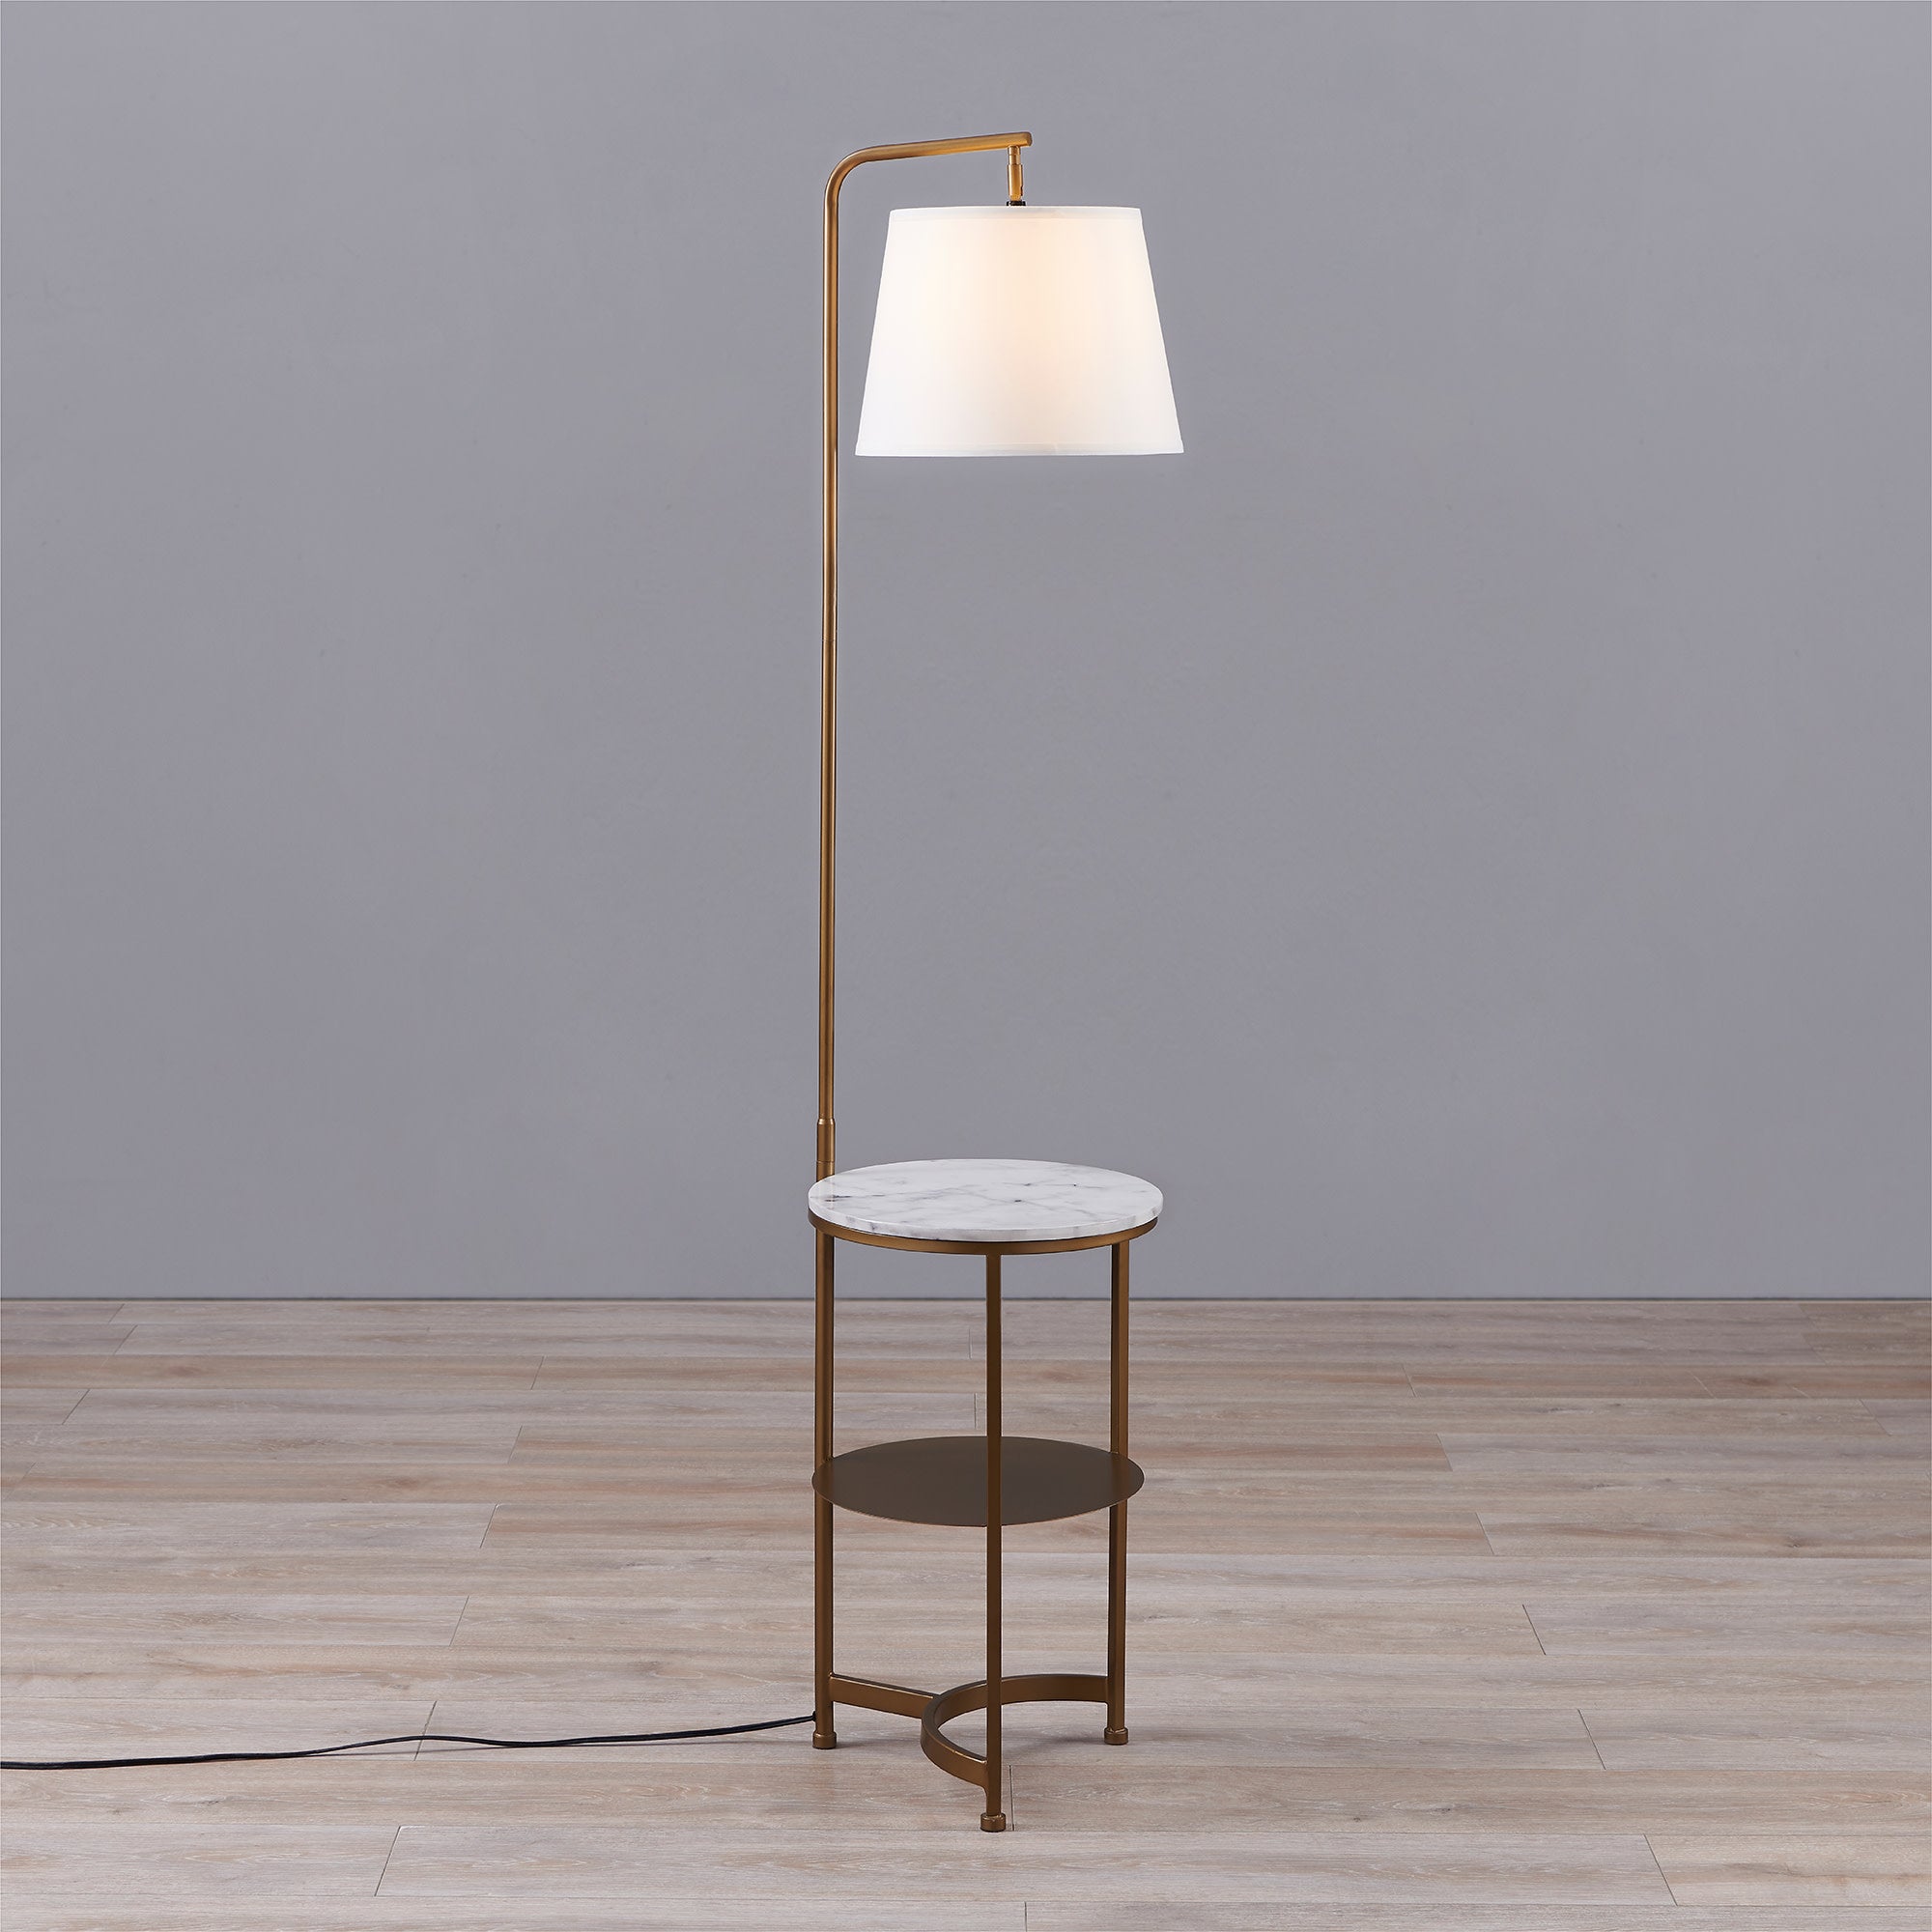 Teamson Home Lilah Floor Lamp with Faux Marble Tray Table and Built-In USB Port, White/Brass